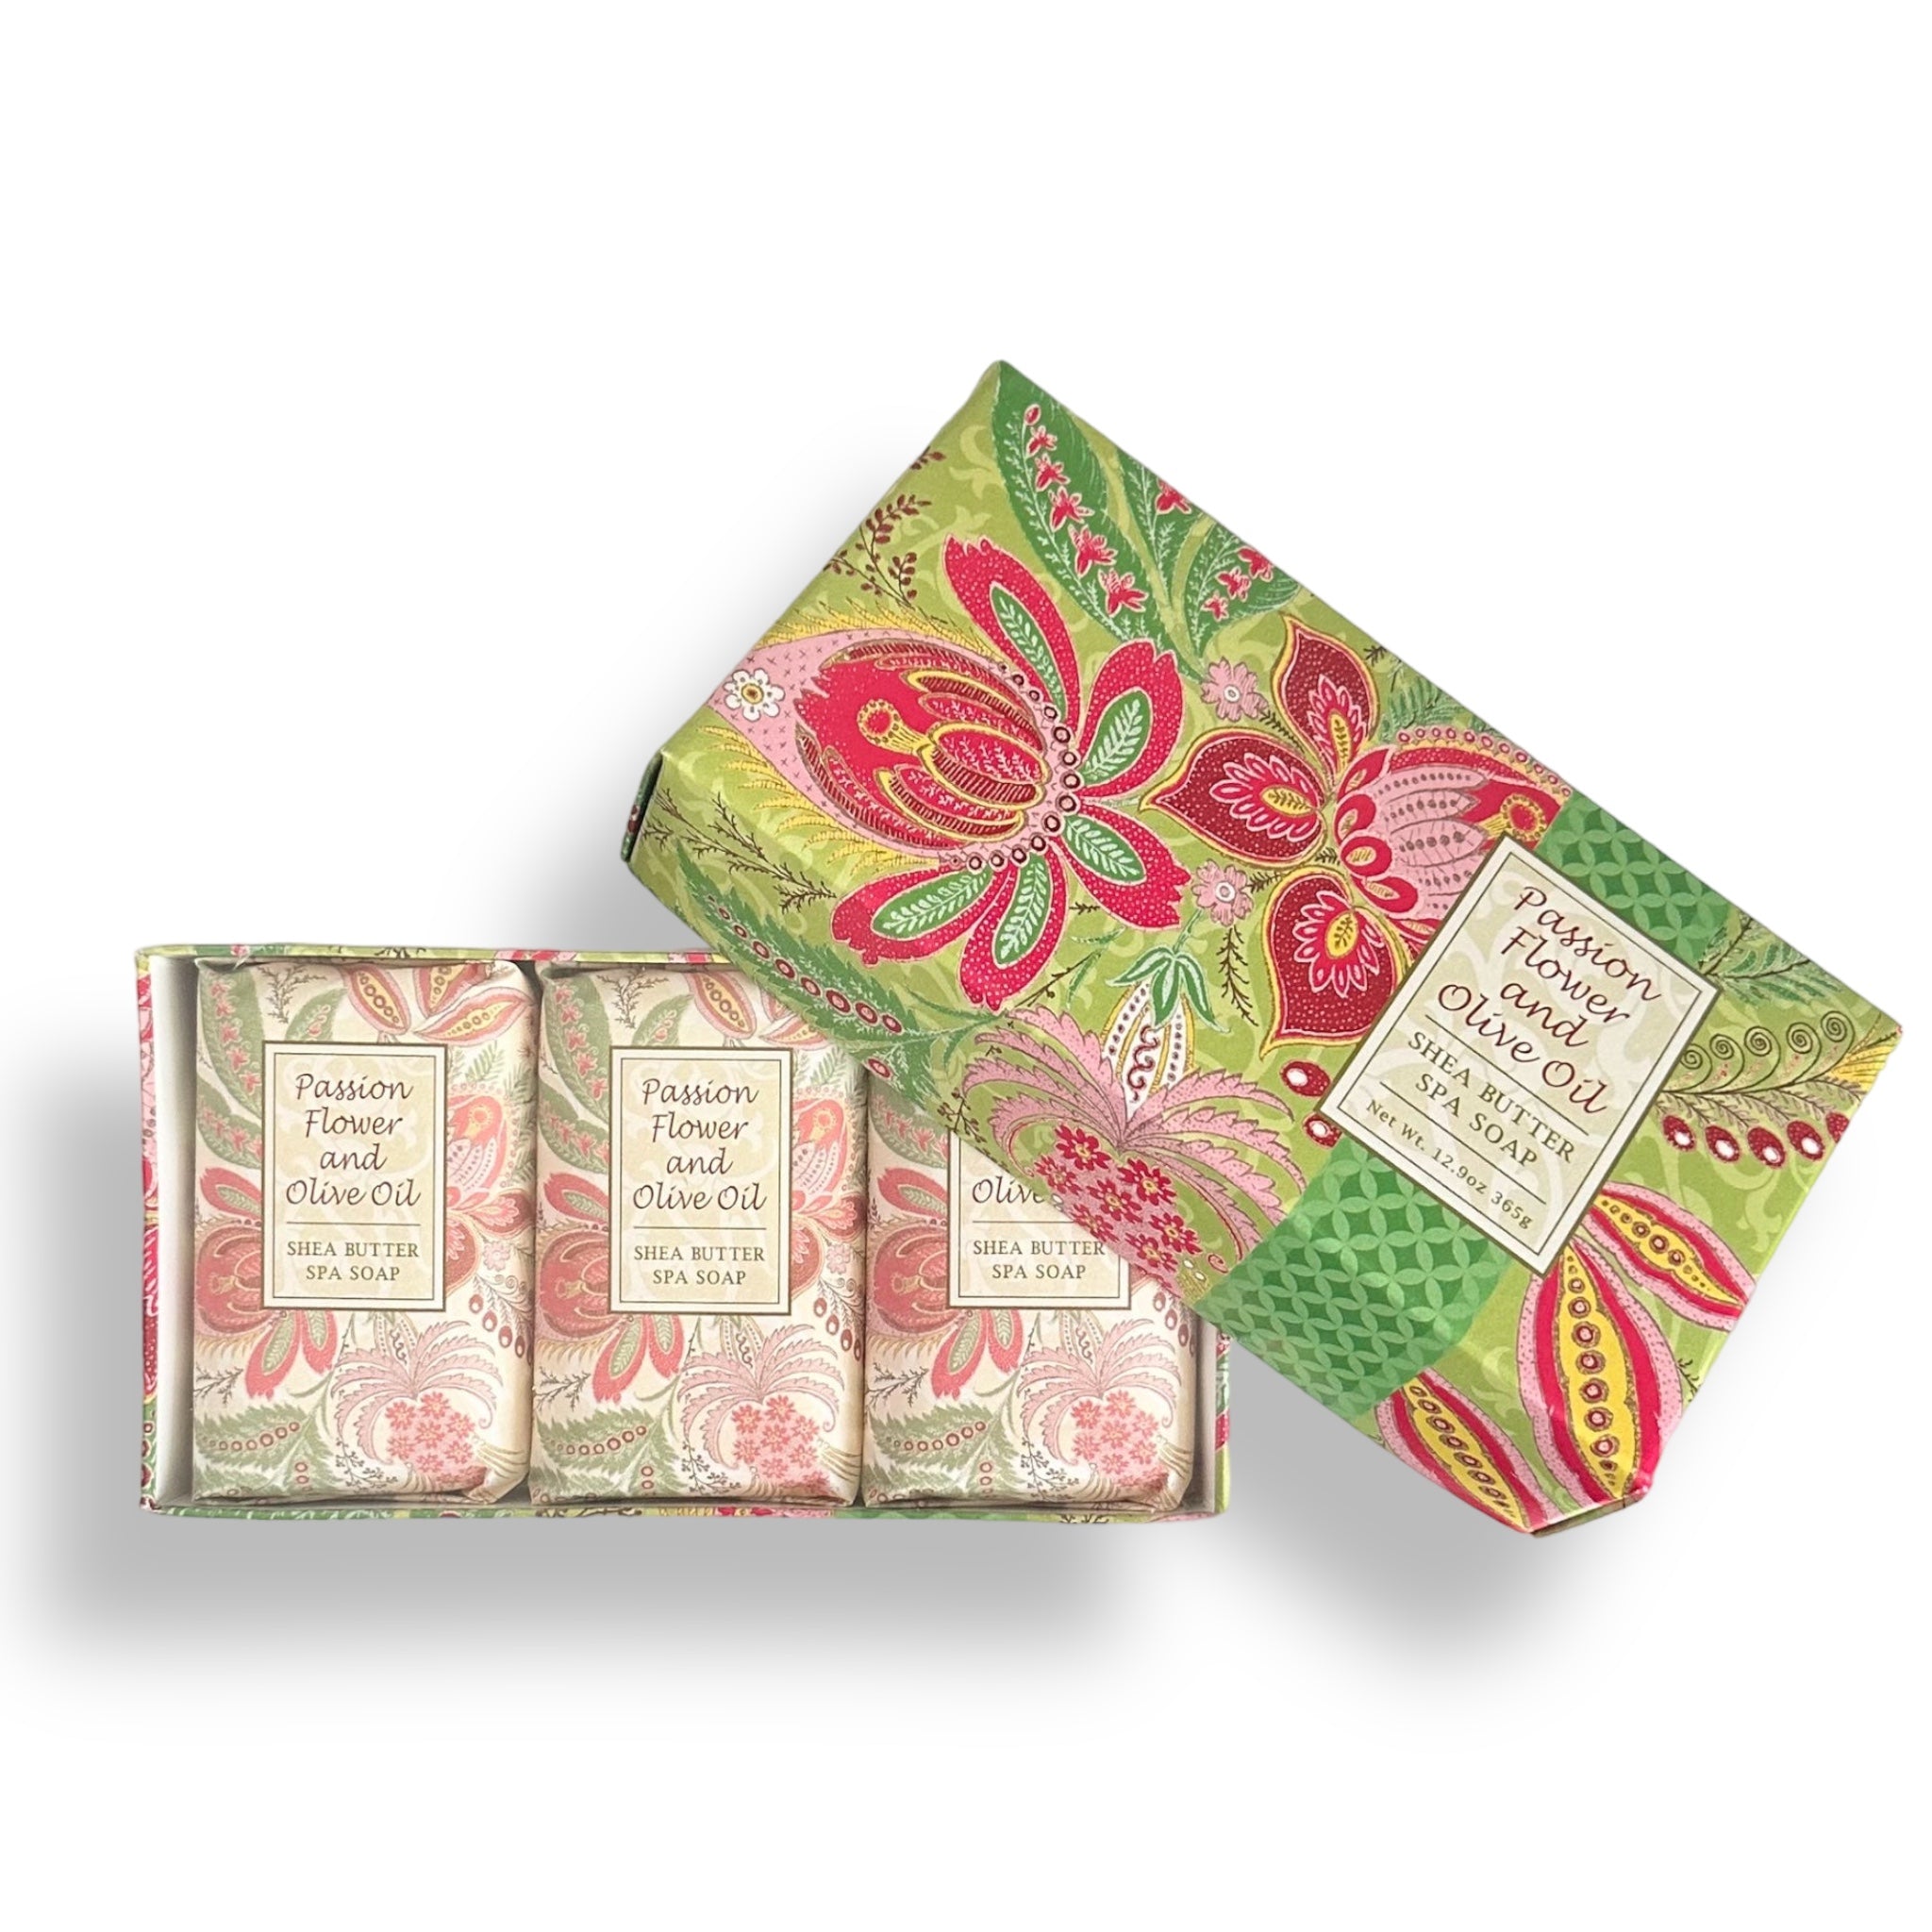 GREENWICH BAY PASSION Flower & OLIVE OIL Soap Gift Set